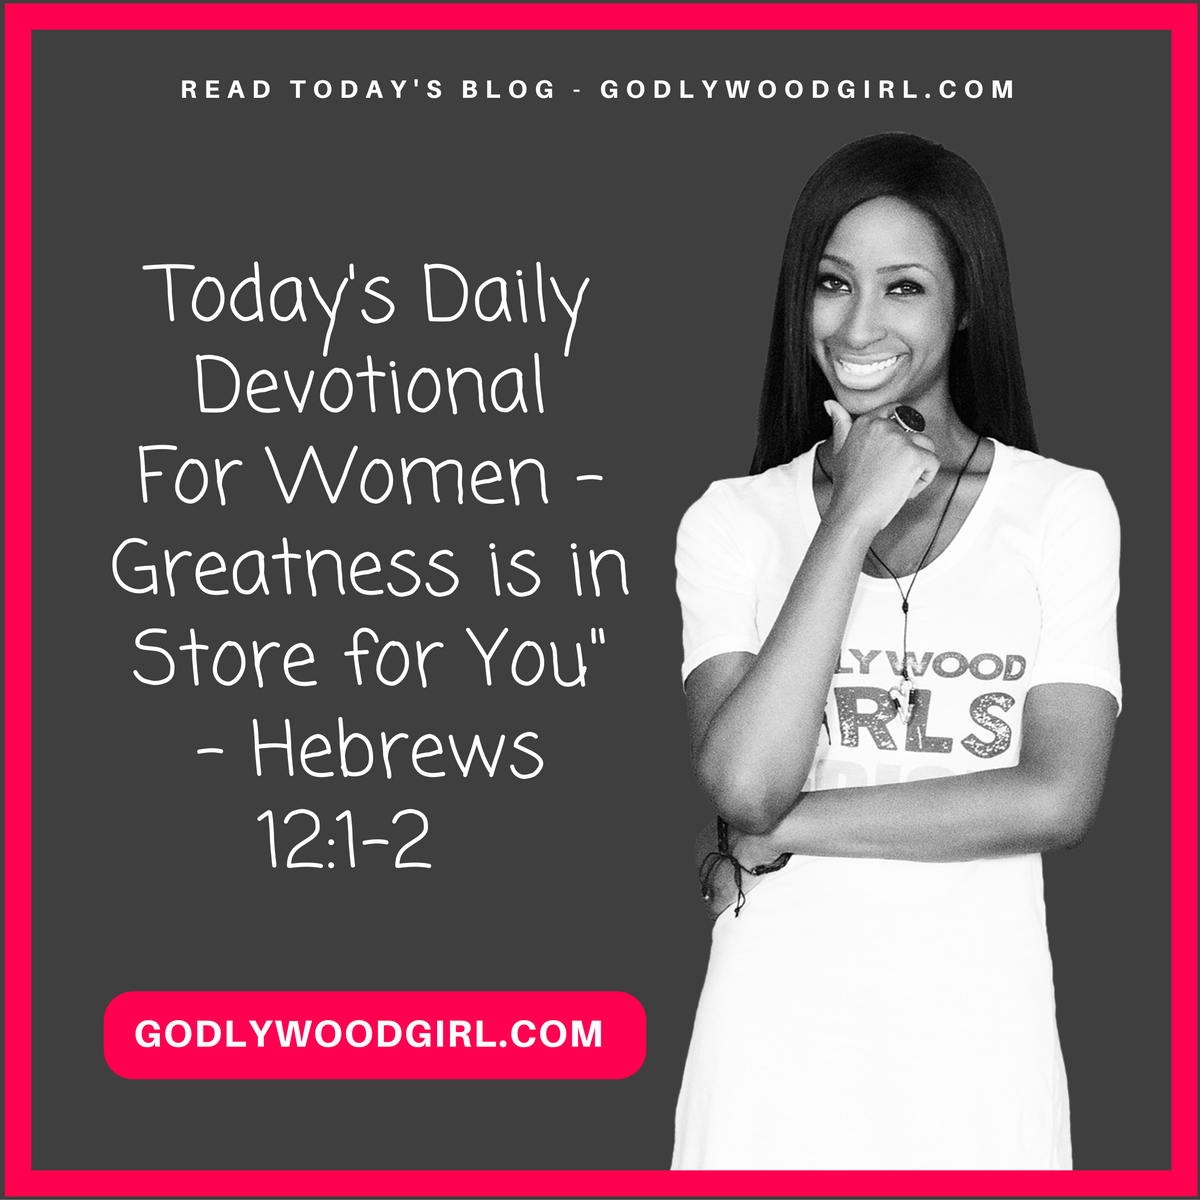 Today's Daily Devotional For Women - Greatness is in Store for You